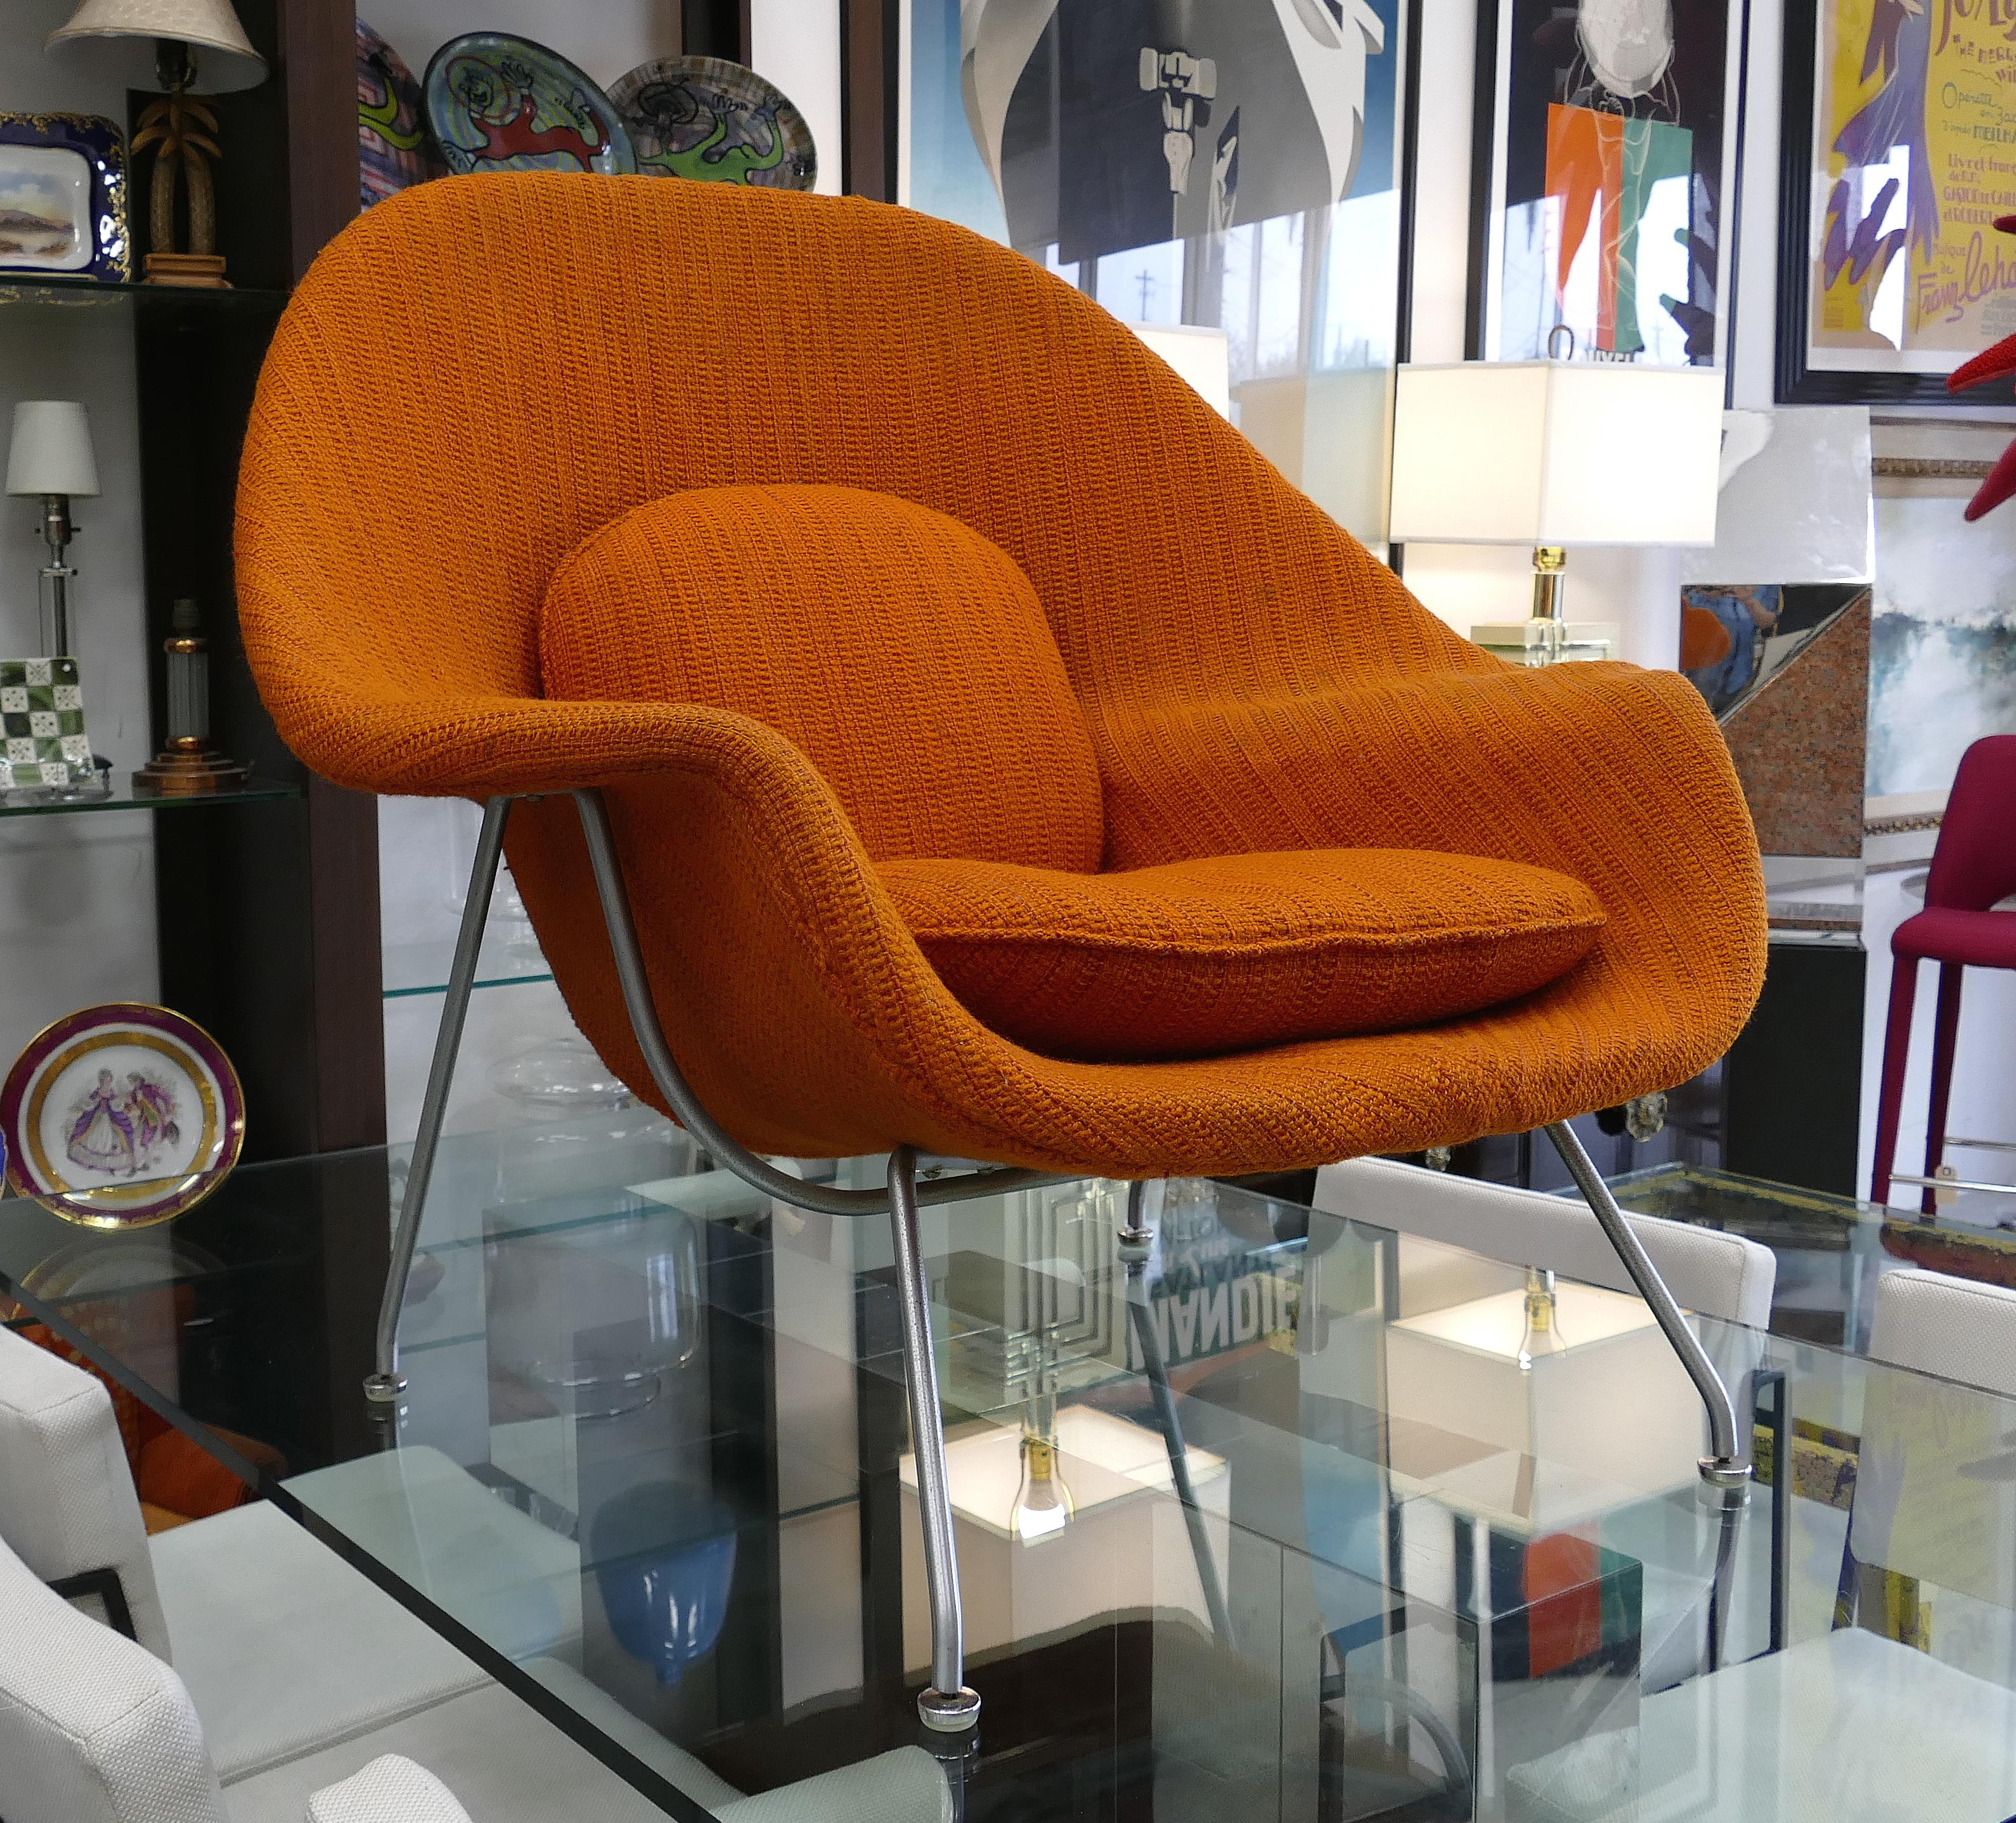 Eero Saarinen Knoll womb chair in original fabric

Offered for sale is an early example of the 